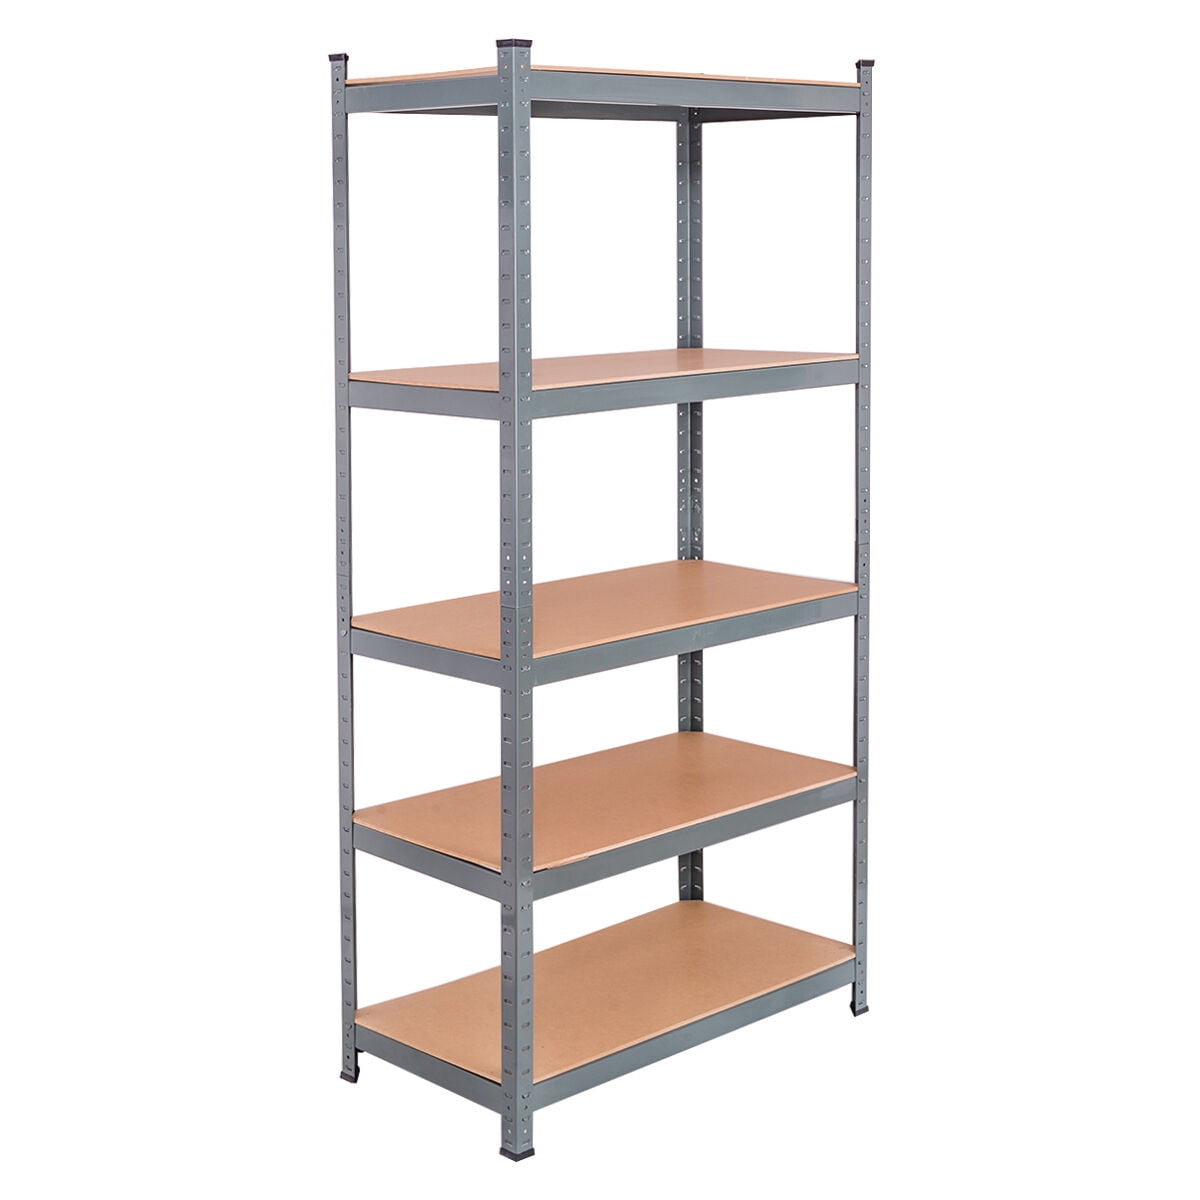 Costway Heavy Duty Steel 72 Level, How To Put Together Metal Shelving